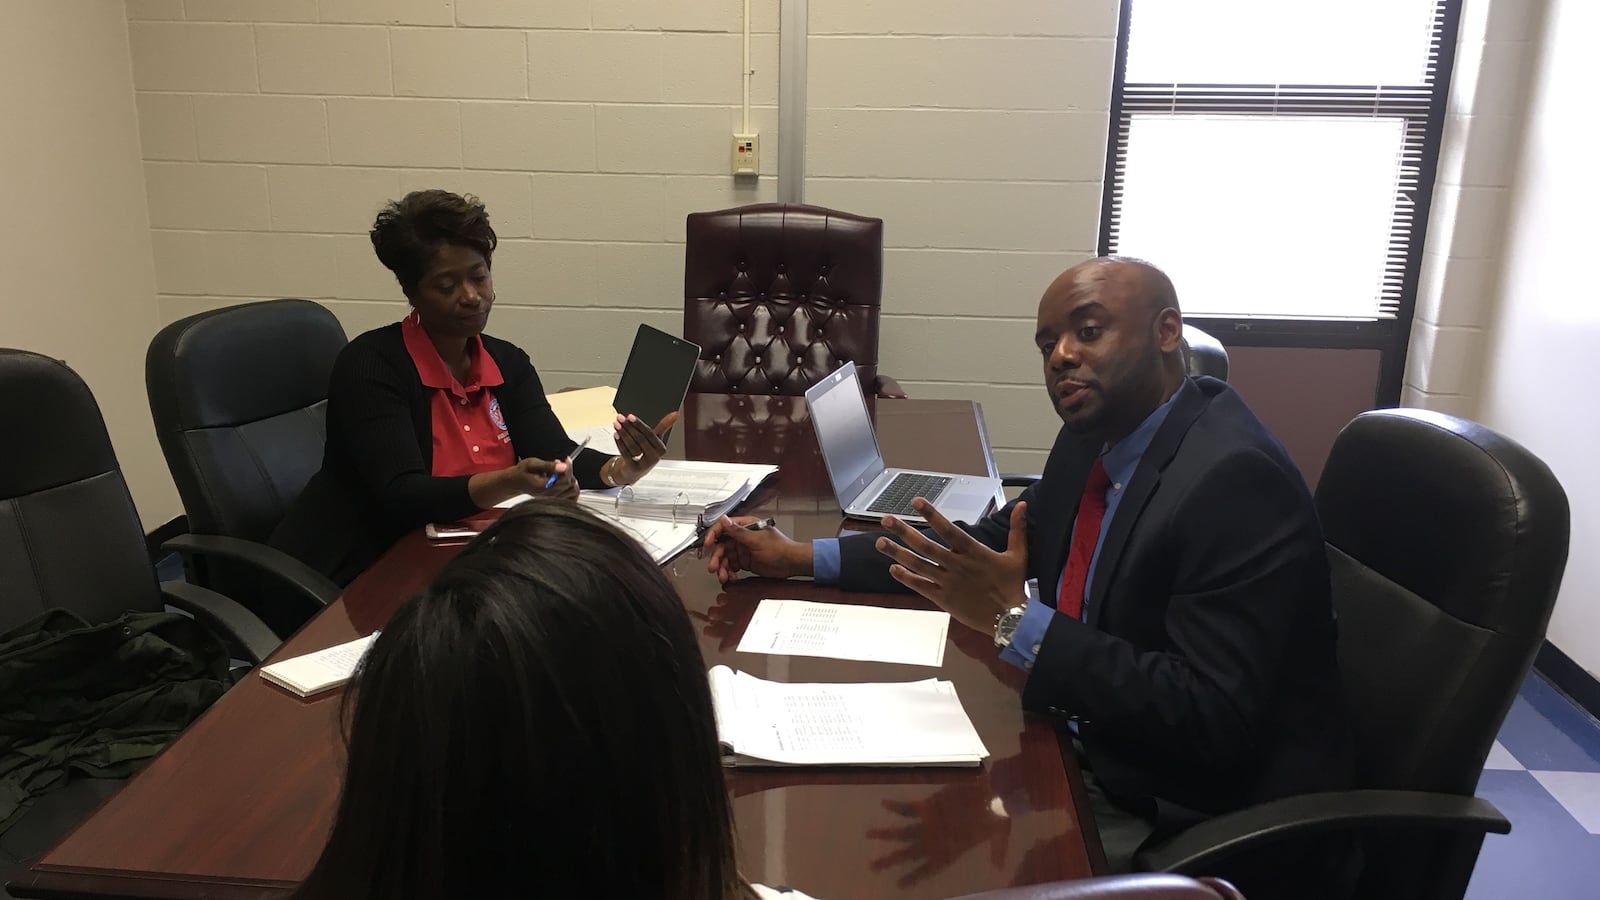 Behavior specialists Clarence Shaw and Inger Spikner speak with a student at Kirby High School in Memphis.